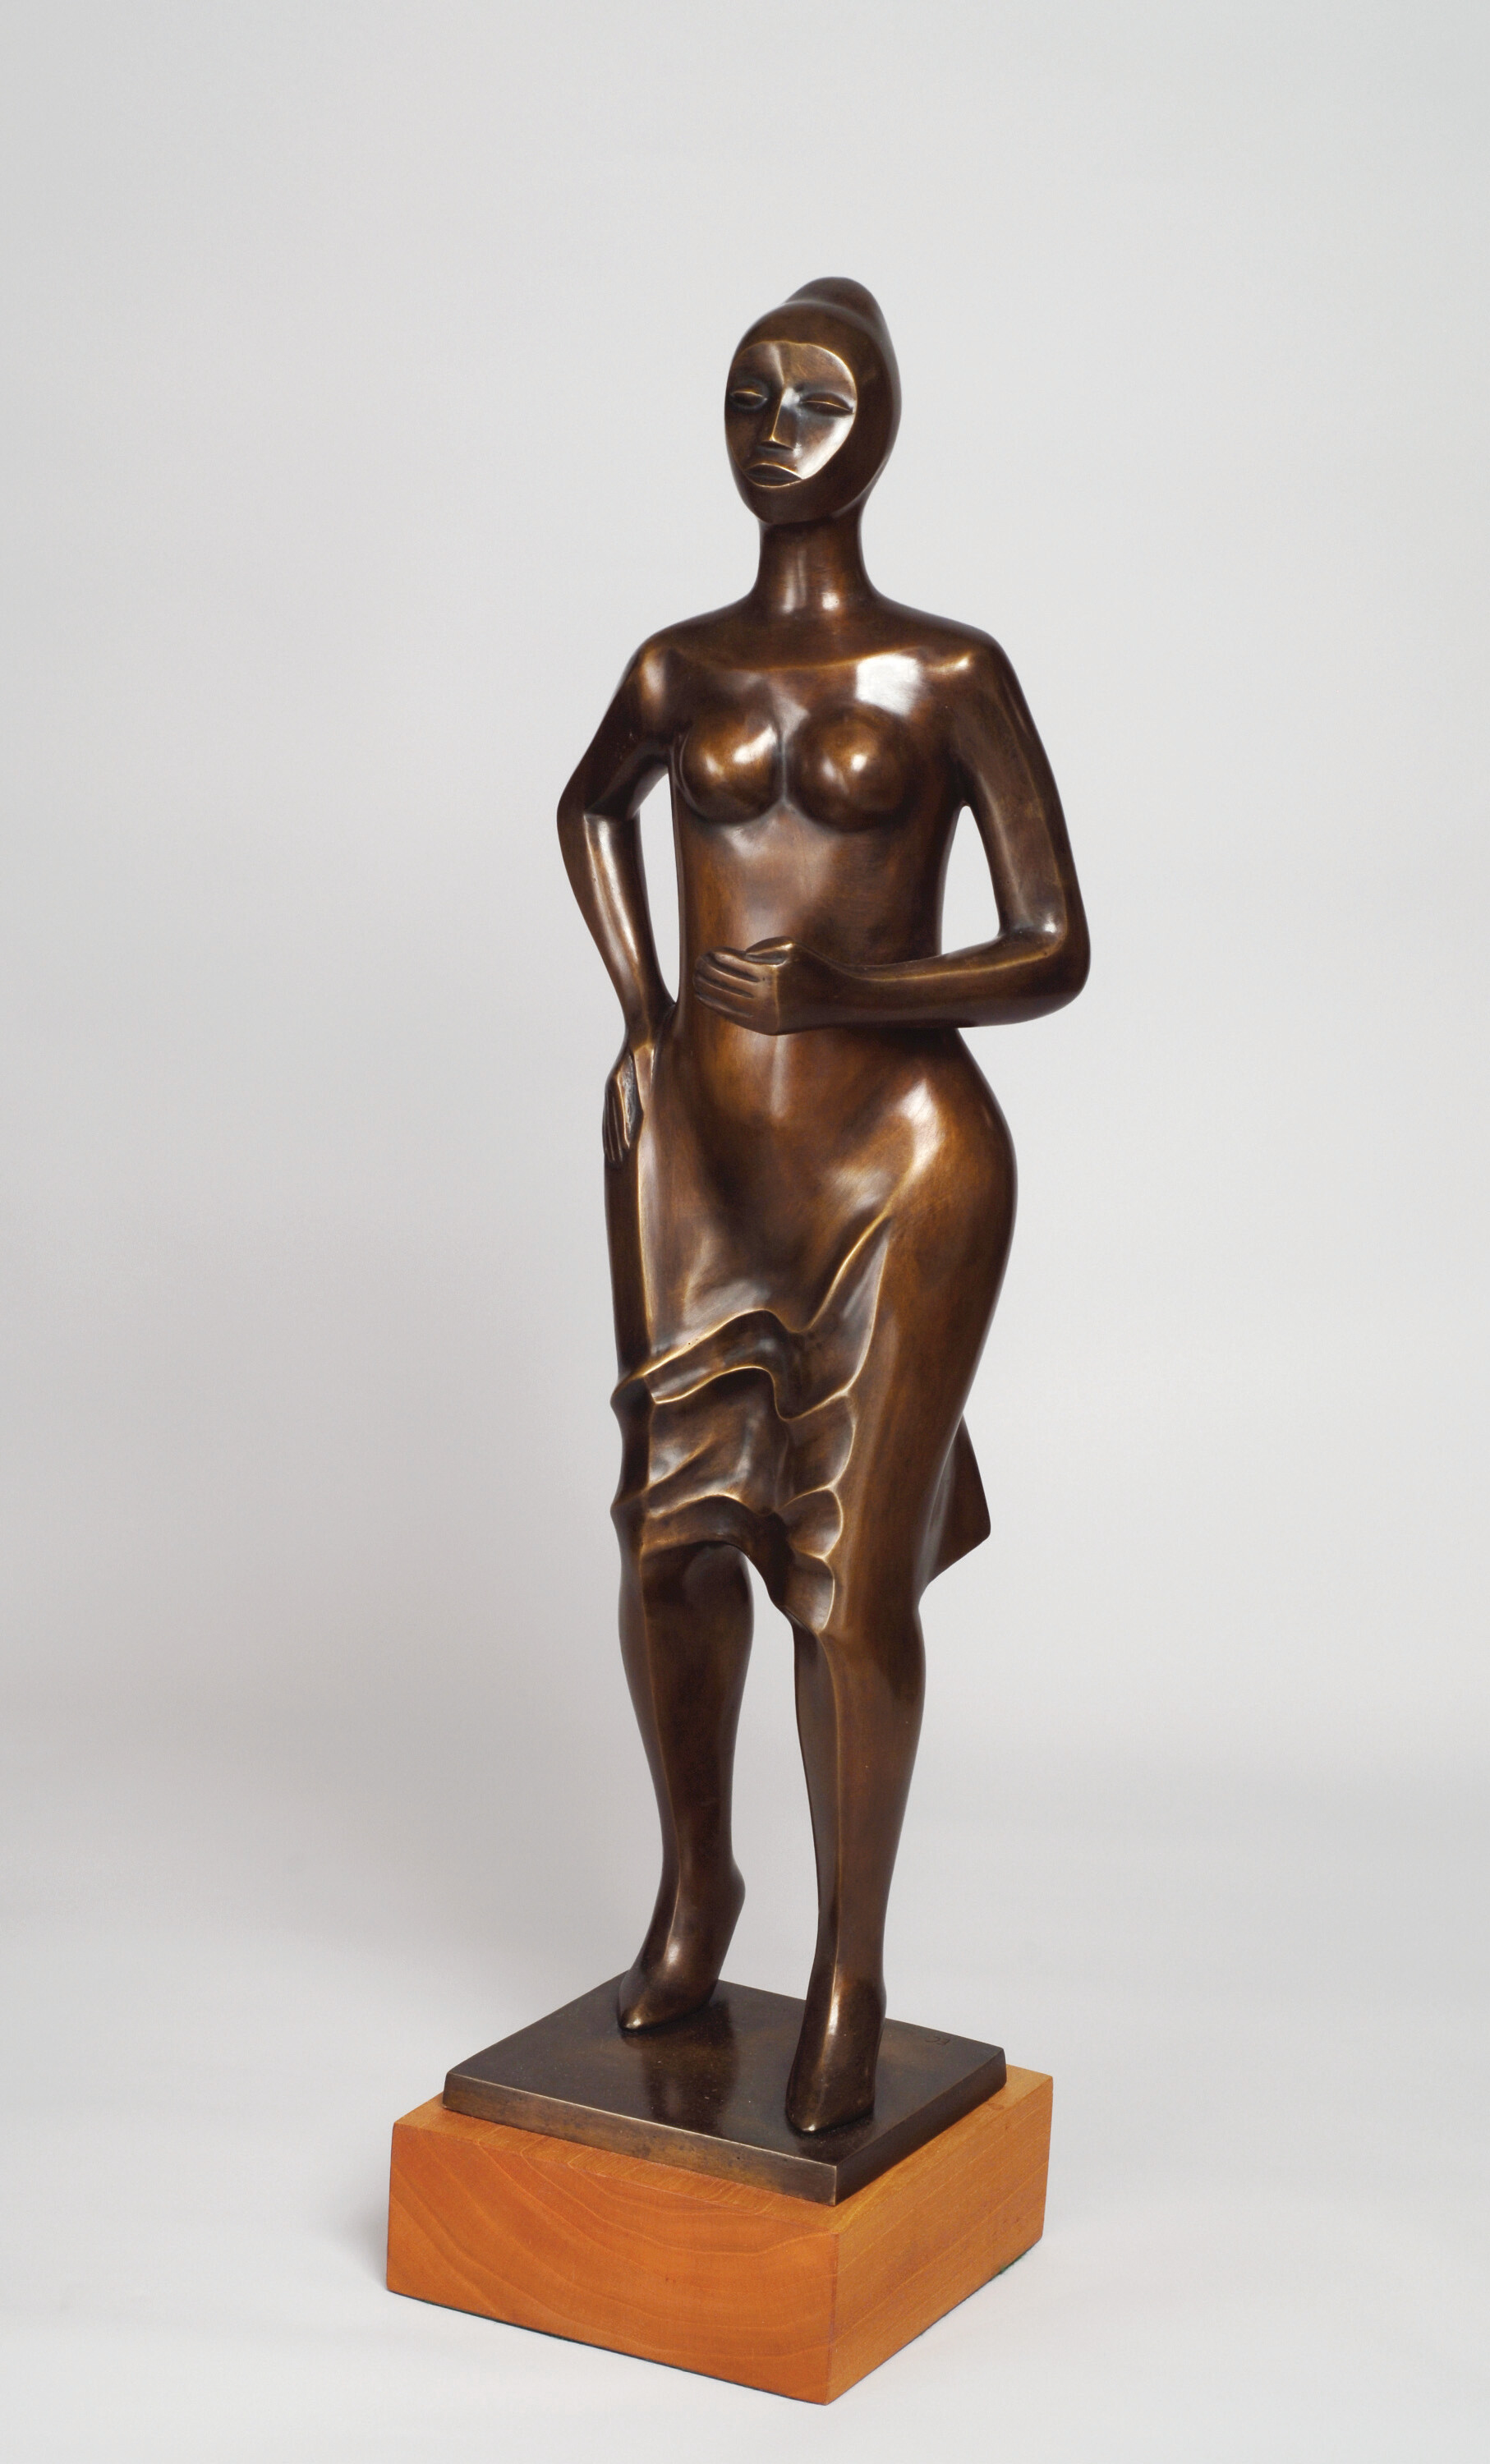 A bronze statue in warm brown shows the figure of a woman who gently steps forward, hand on hip. The forms of her body are stylized and geometric, and she wears a dress or skirt that is revealed where it gathers across her legs as if pulled by a breeze. Her face is simplified, upturned, and her hair is styled in a high bun. 